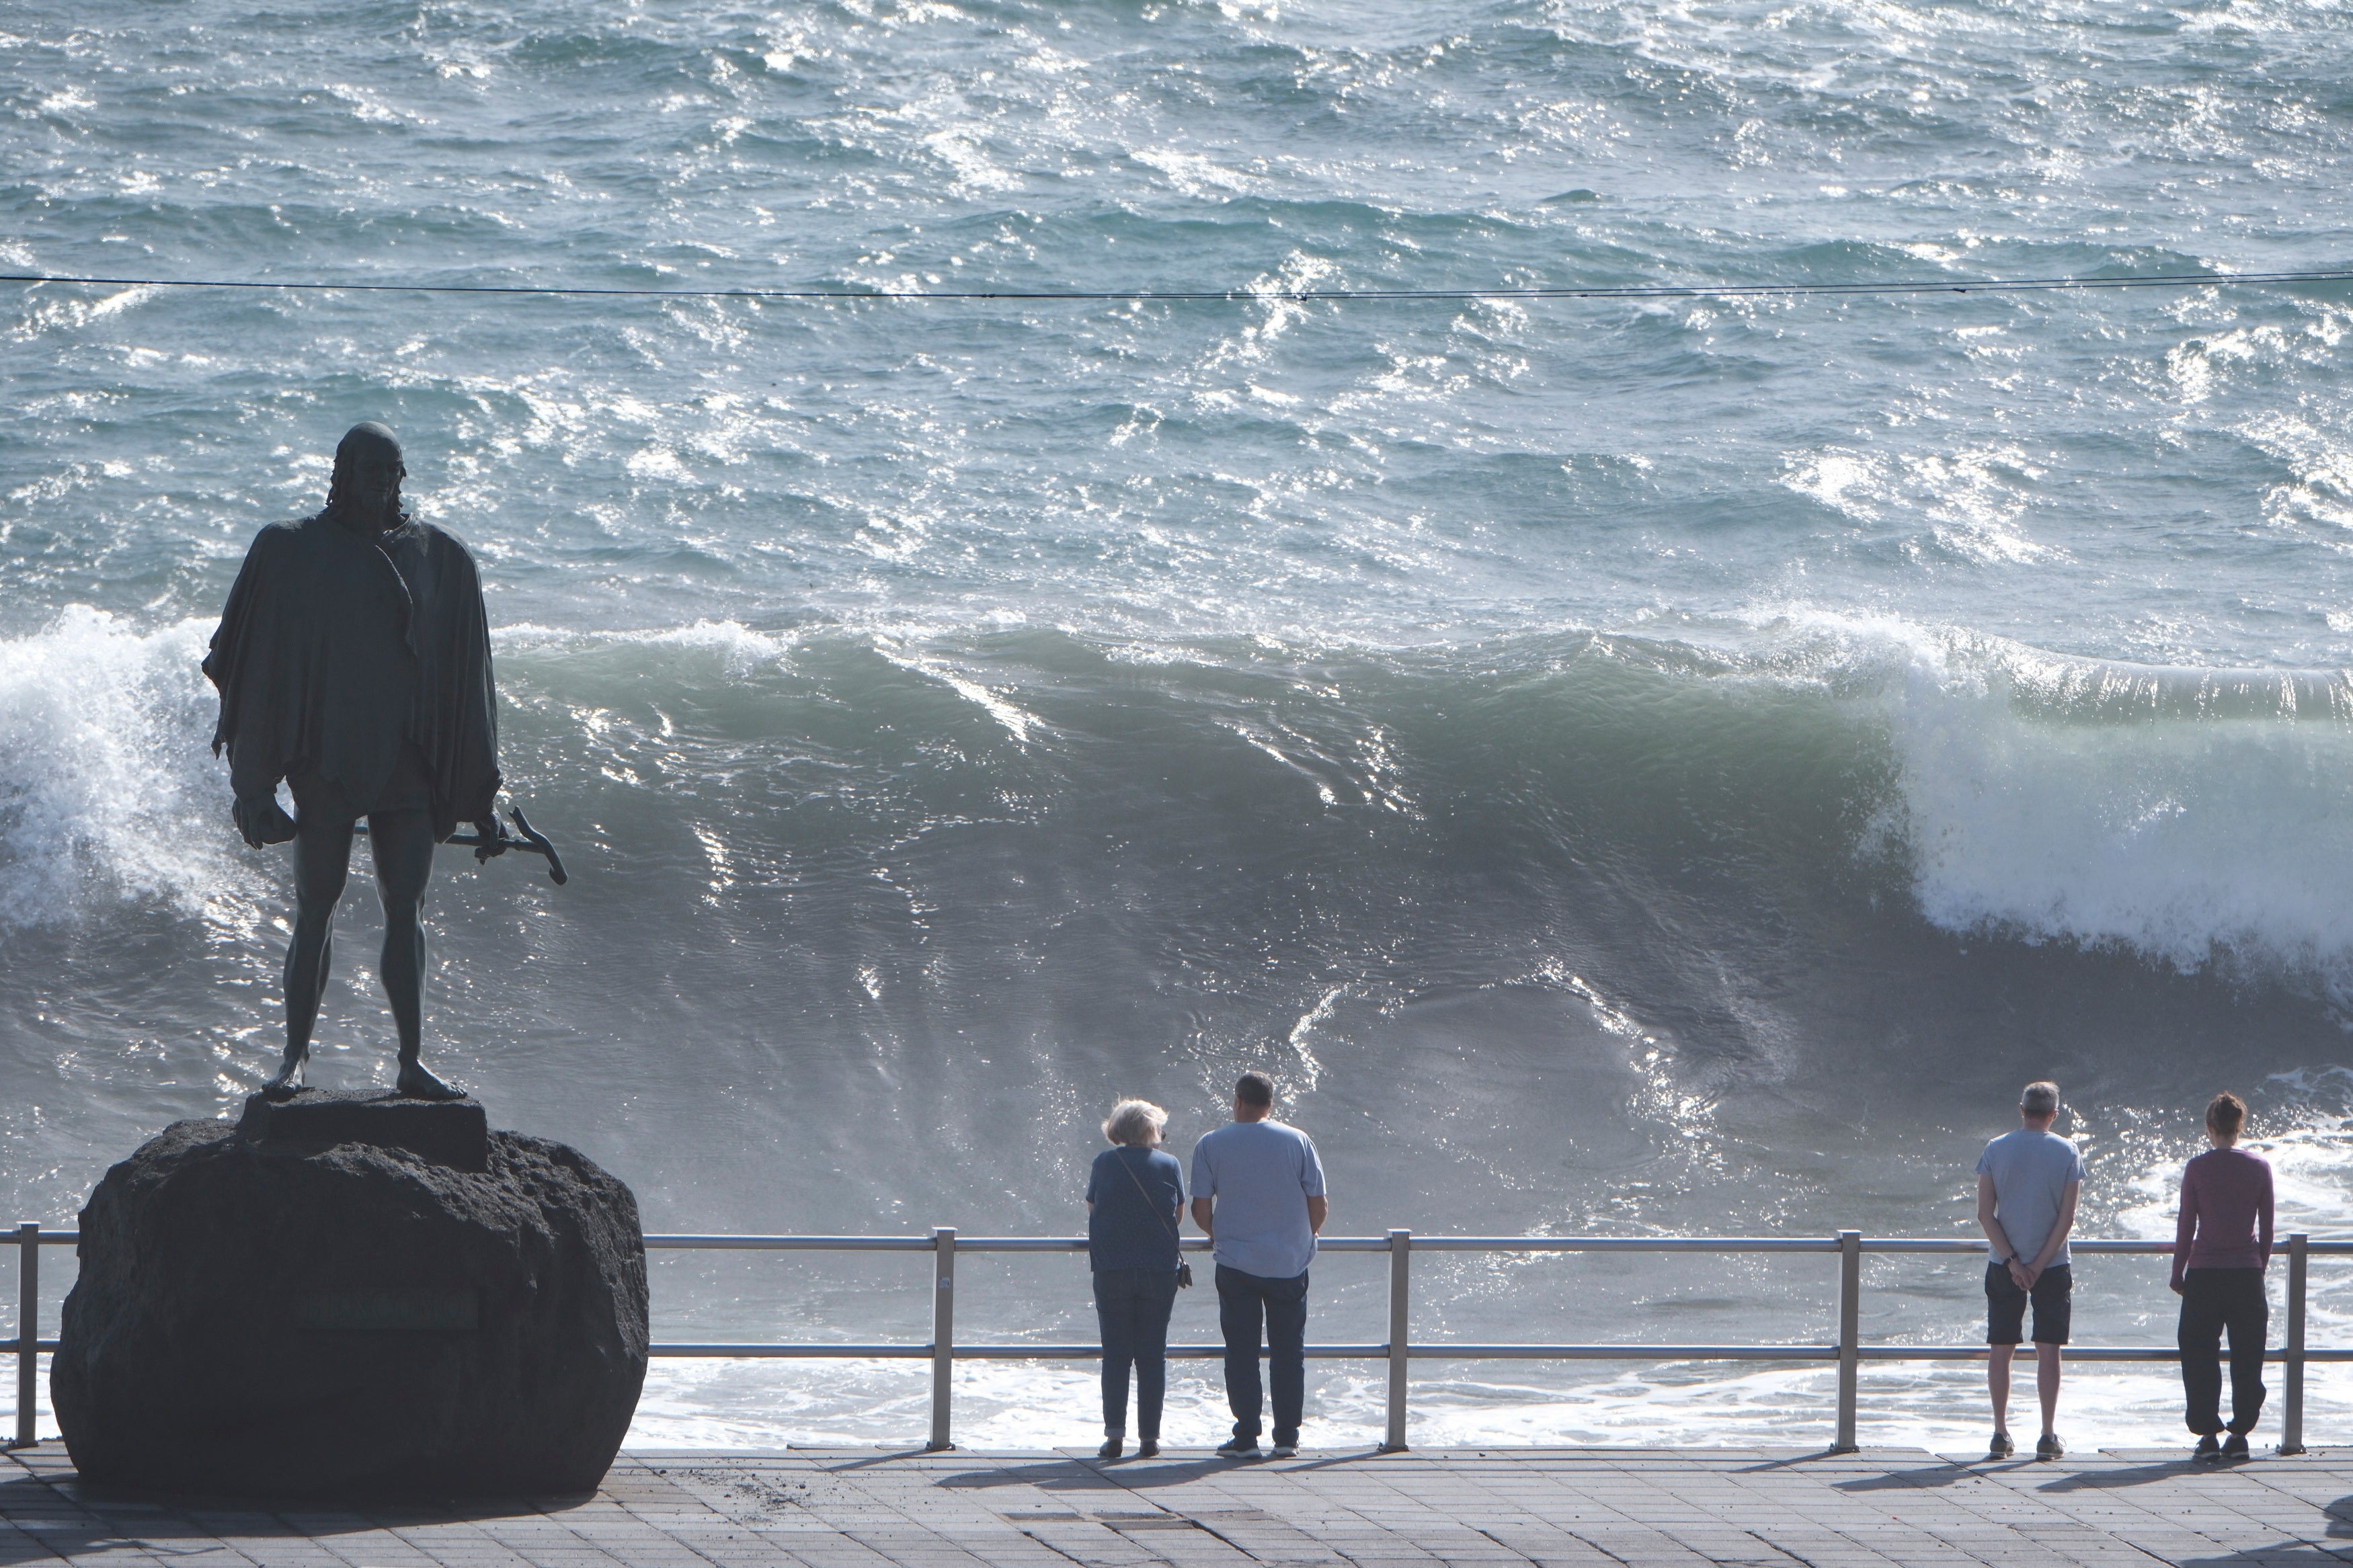 Onlookers watch the high waves breaking at Candelaria, Tenerife